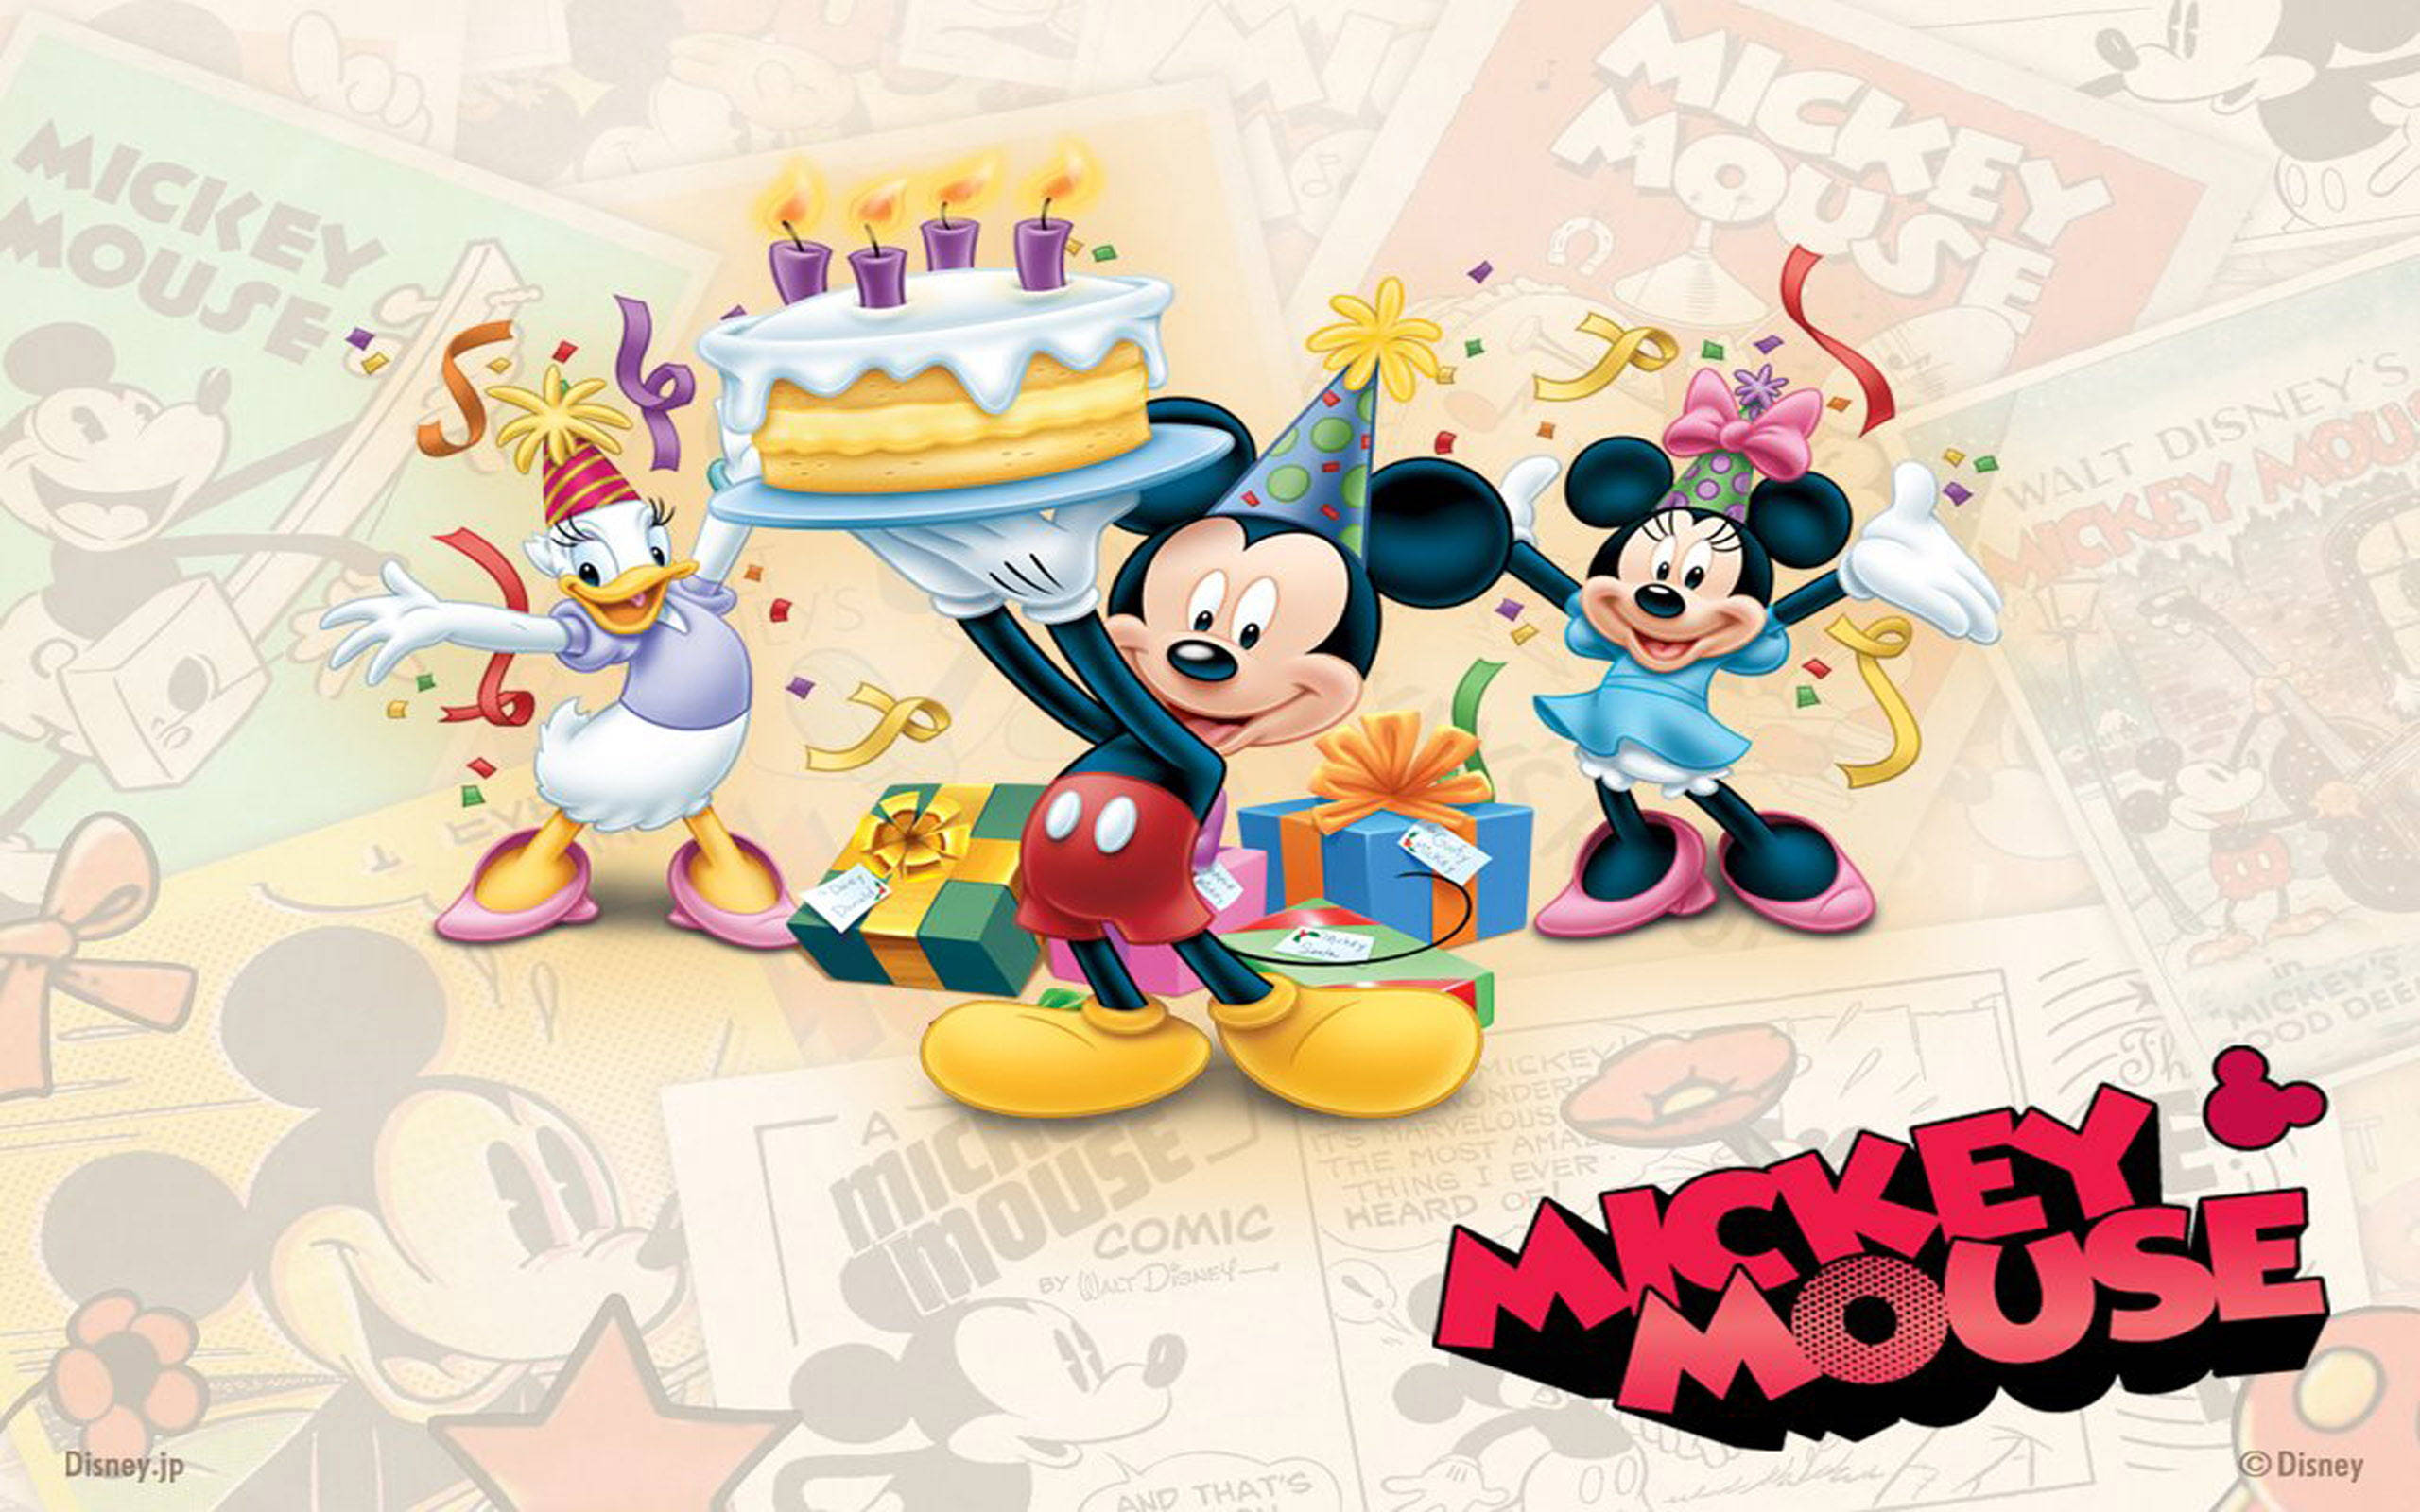 Celebrate With Style - Delicious Mickey Mouse Themed Birthday Cake Wallpaper